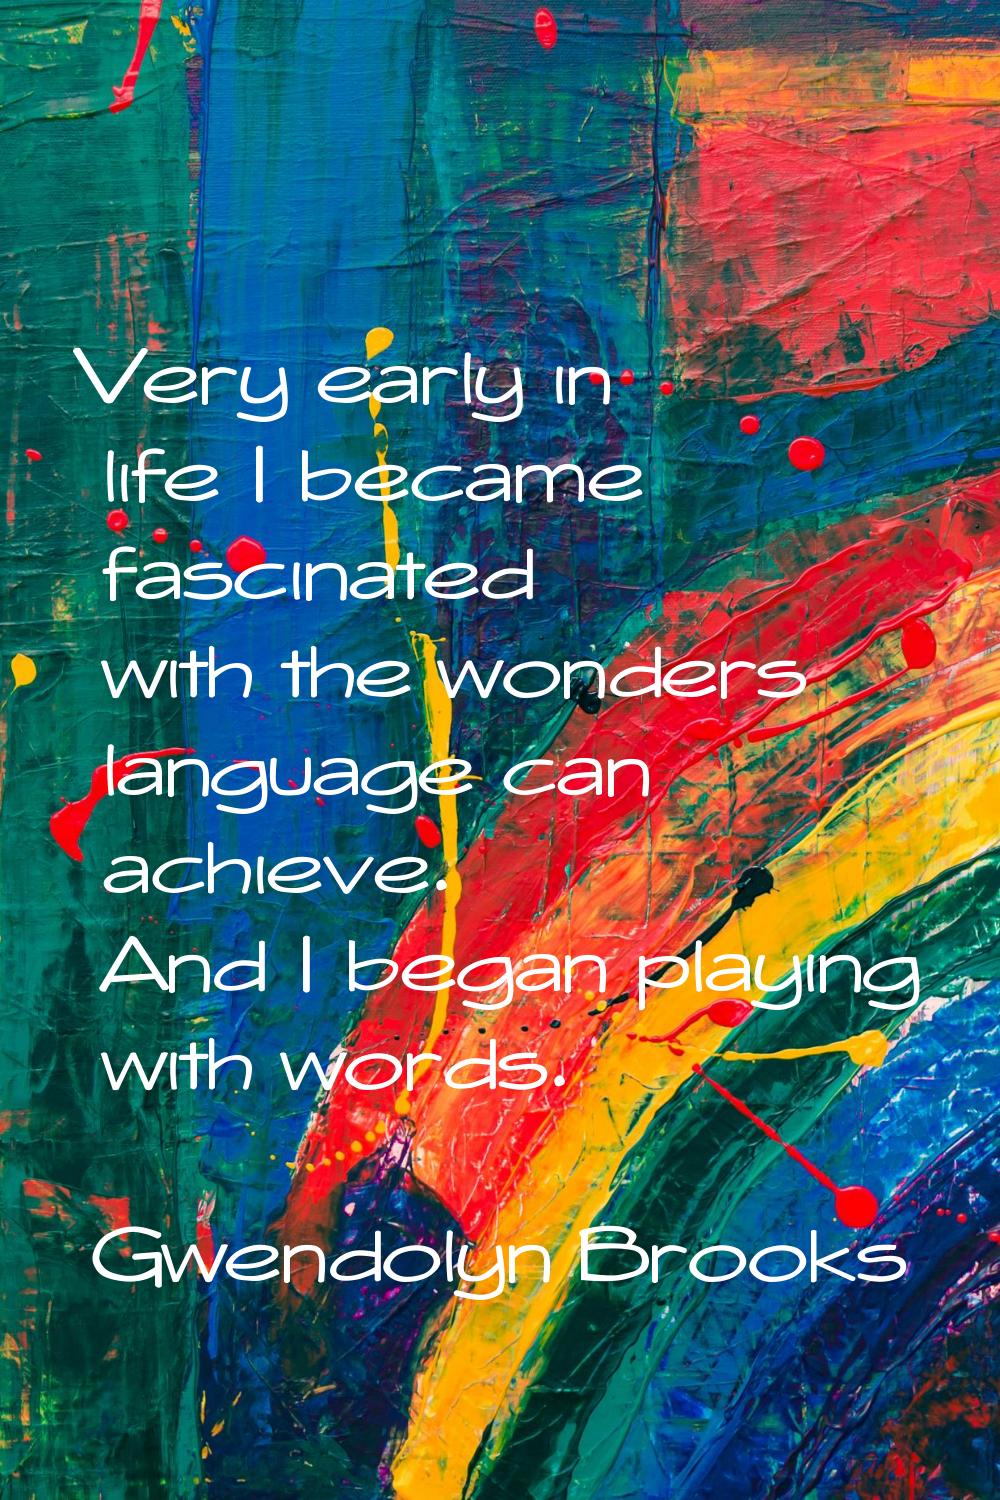 Very early in life I became fascinated with the wonders language can achieve. And I began playing w